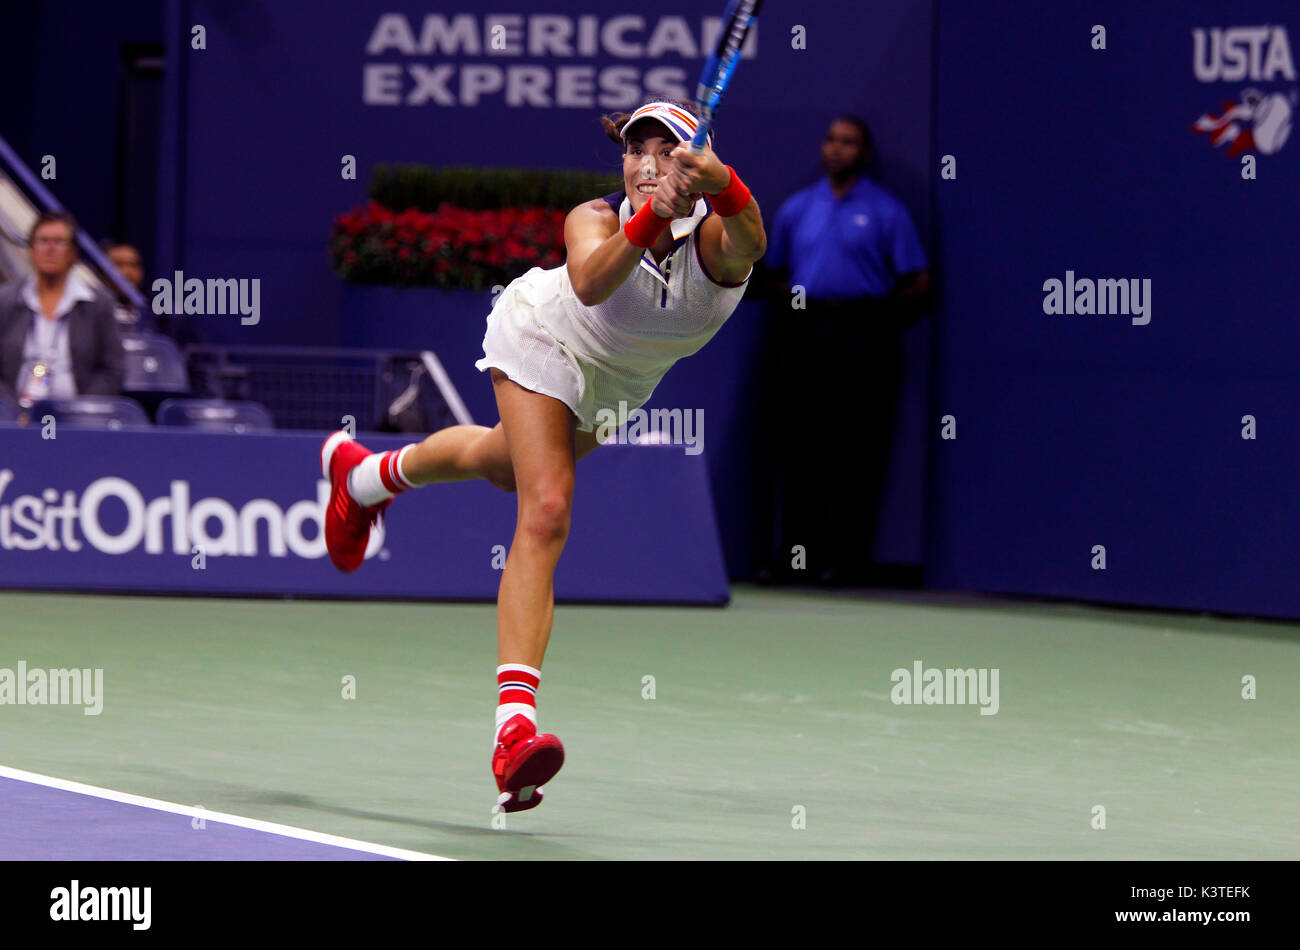 New York, USA. 03rd Sep, 2017. New York, United States. 03rd Sep, 2017. US Open Tennis: New York, 3 September, 2017 - # 3 seed Garabine Muguruza of Spain stretches for a backhand during her fourth round match against # 13 seed Petra Kivitova of the Czech Republic at the US Open in Flushing Meadows, New York. Kivitova won the match to earn a spot in the quarterfinals Credit: Adam Stoltman/Alamy Live News Credit: Adam Stoltman/Alamy Live News Stock Photo